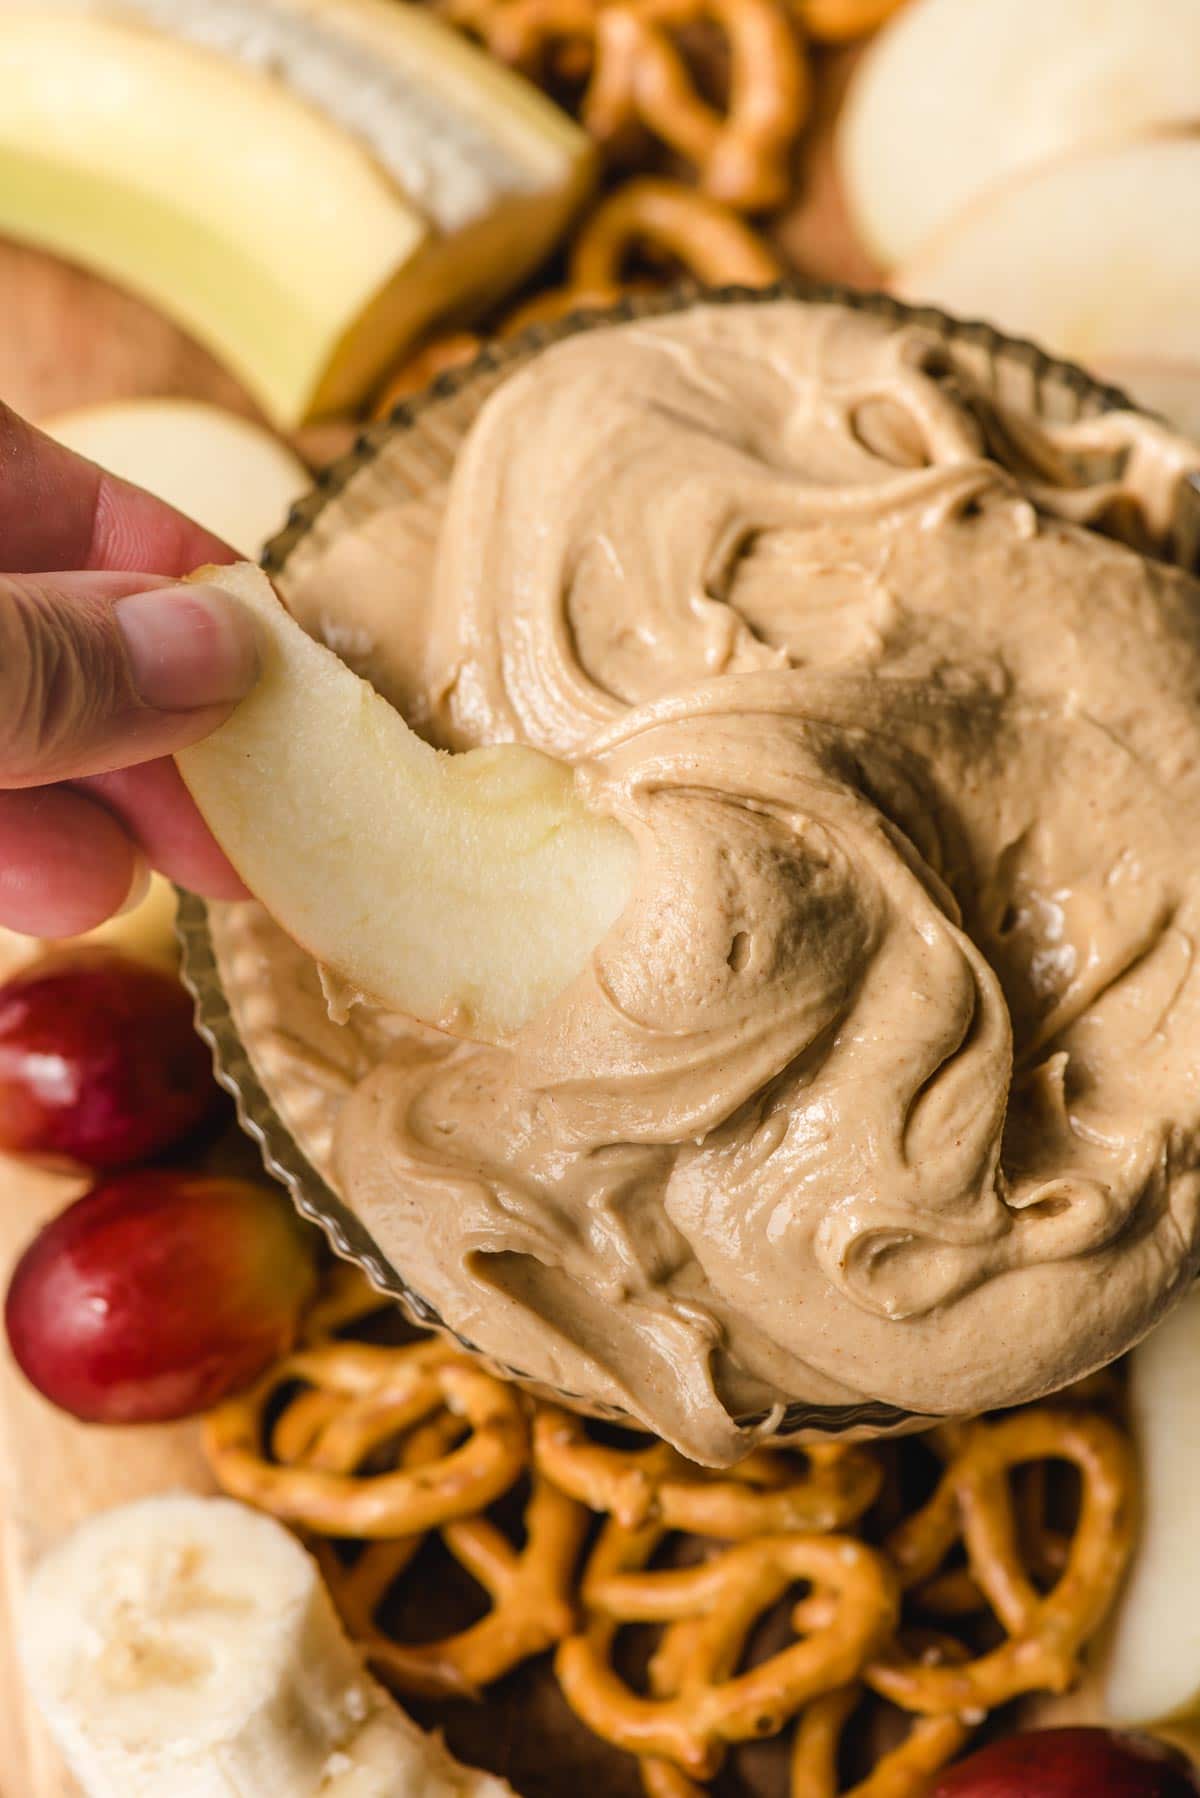 Hand dipping a slice of apple into a bowl of Amish peanut butter spread.